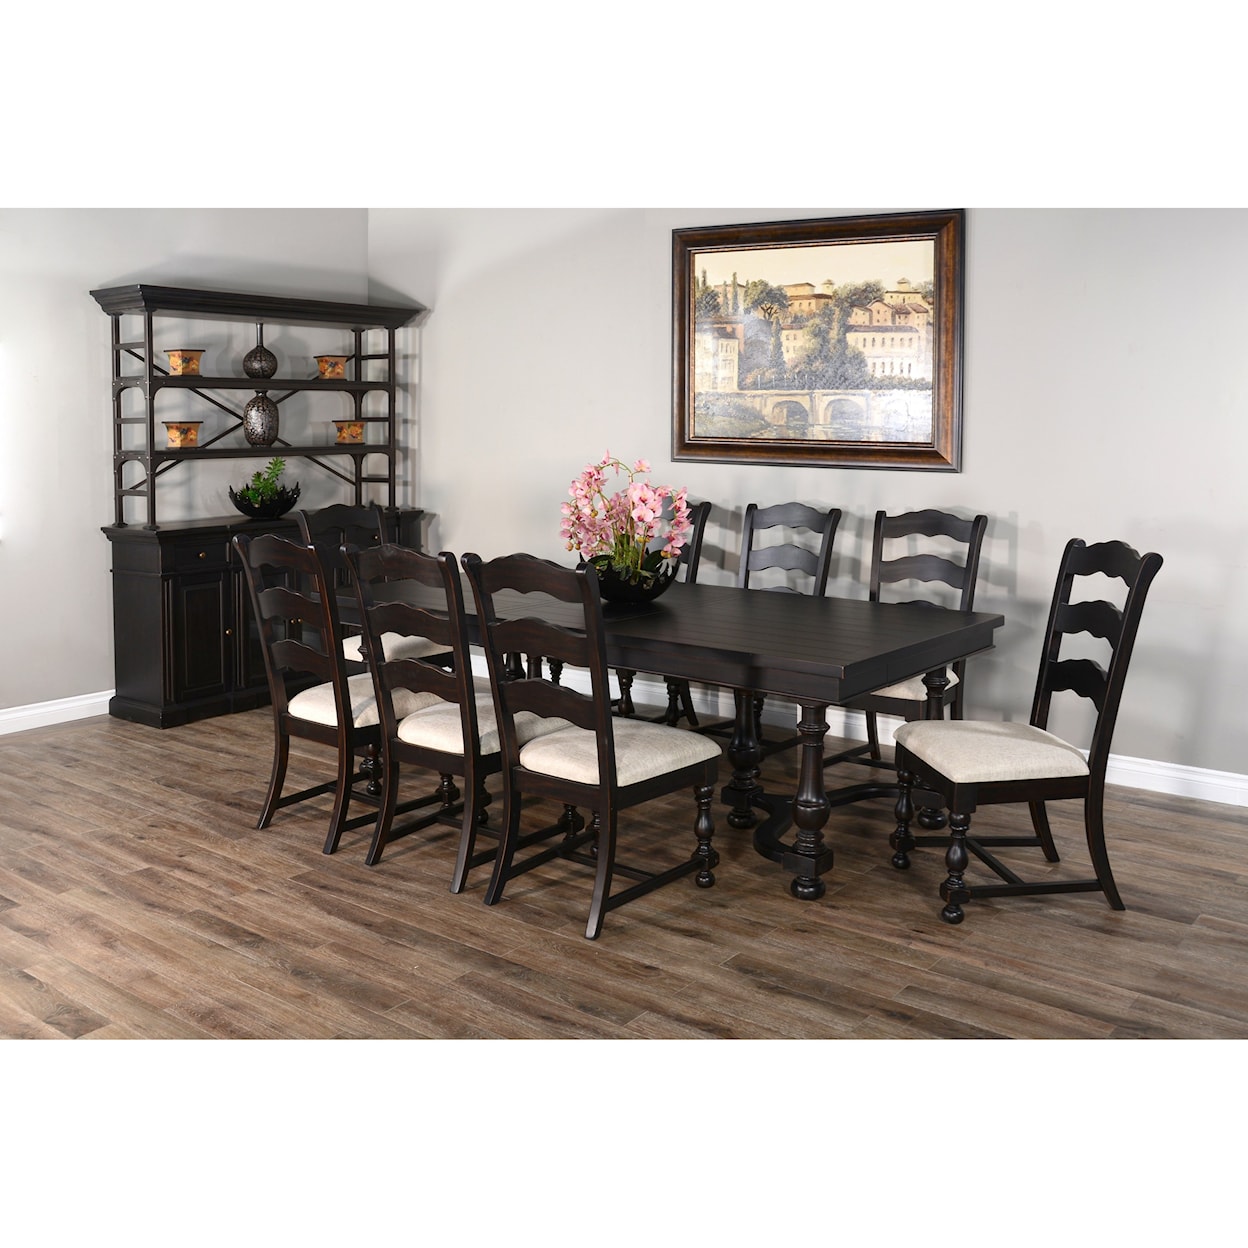 Sunny Designs Scottsdale BW Dining Room Group